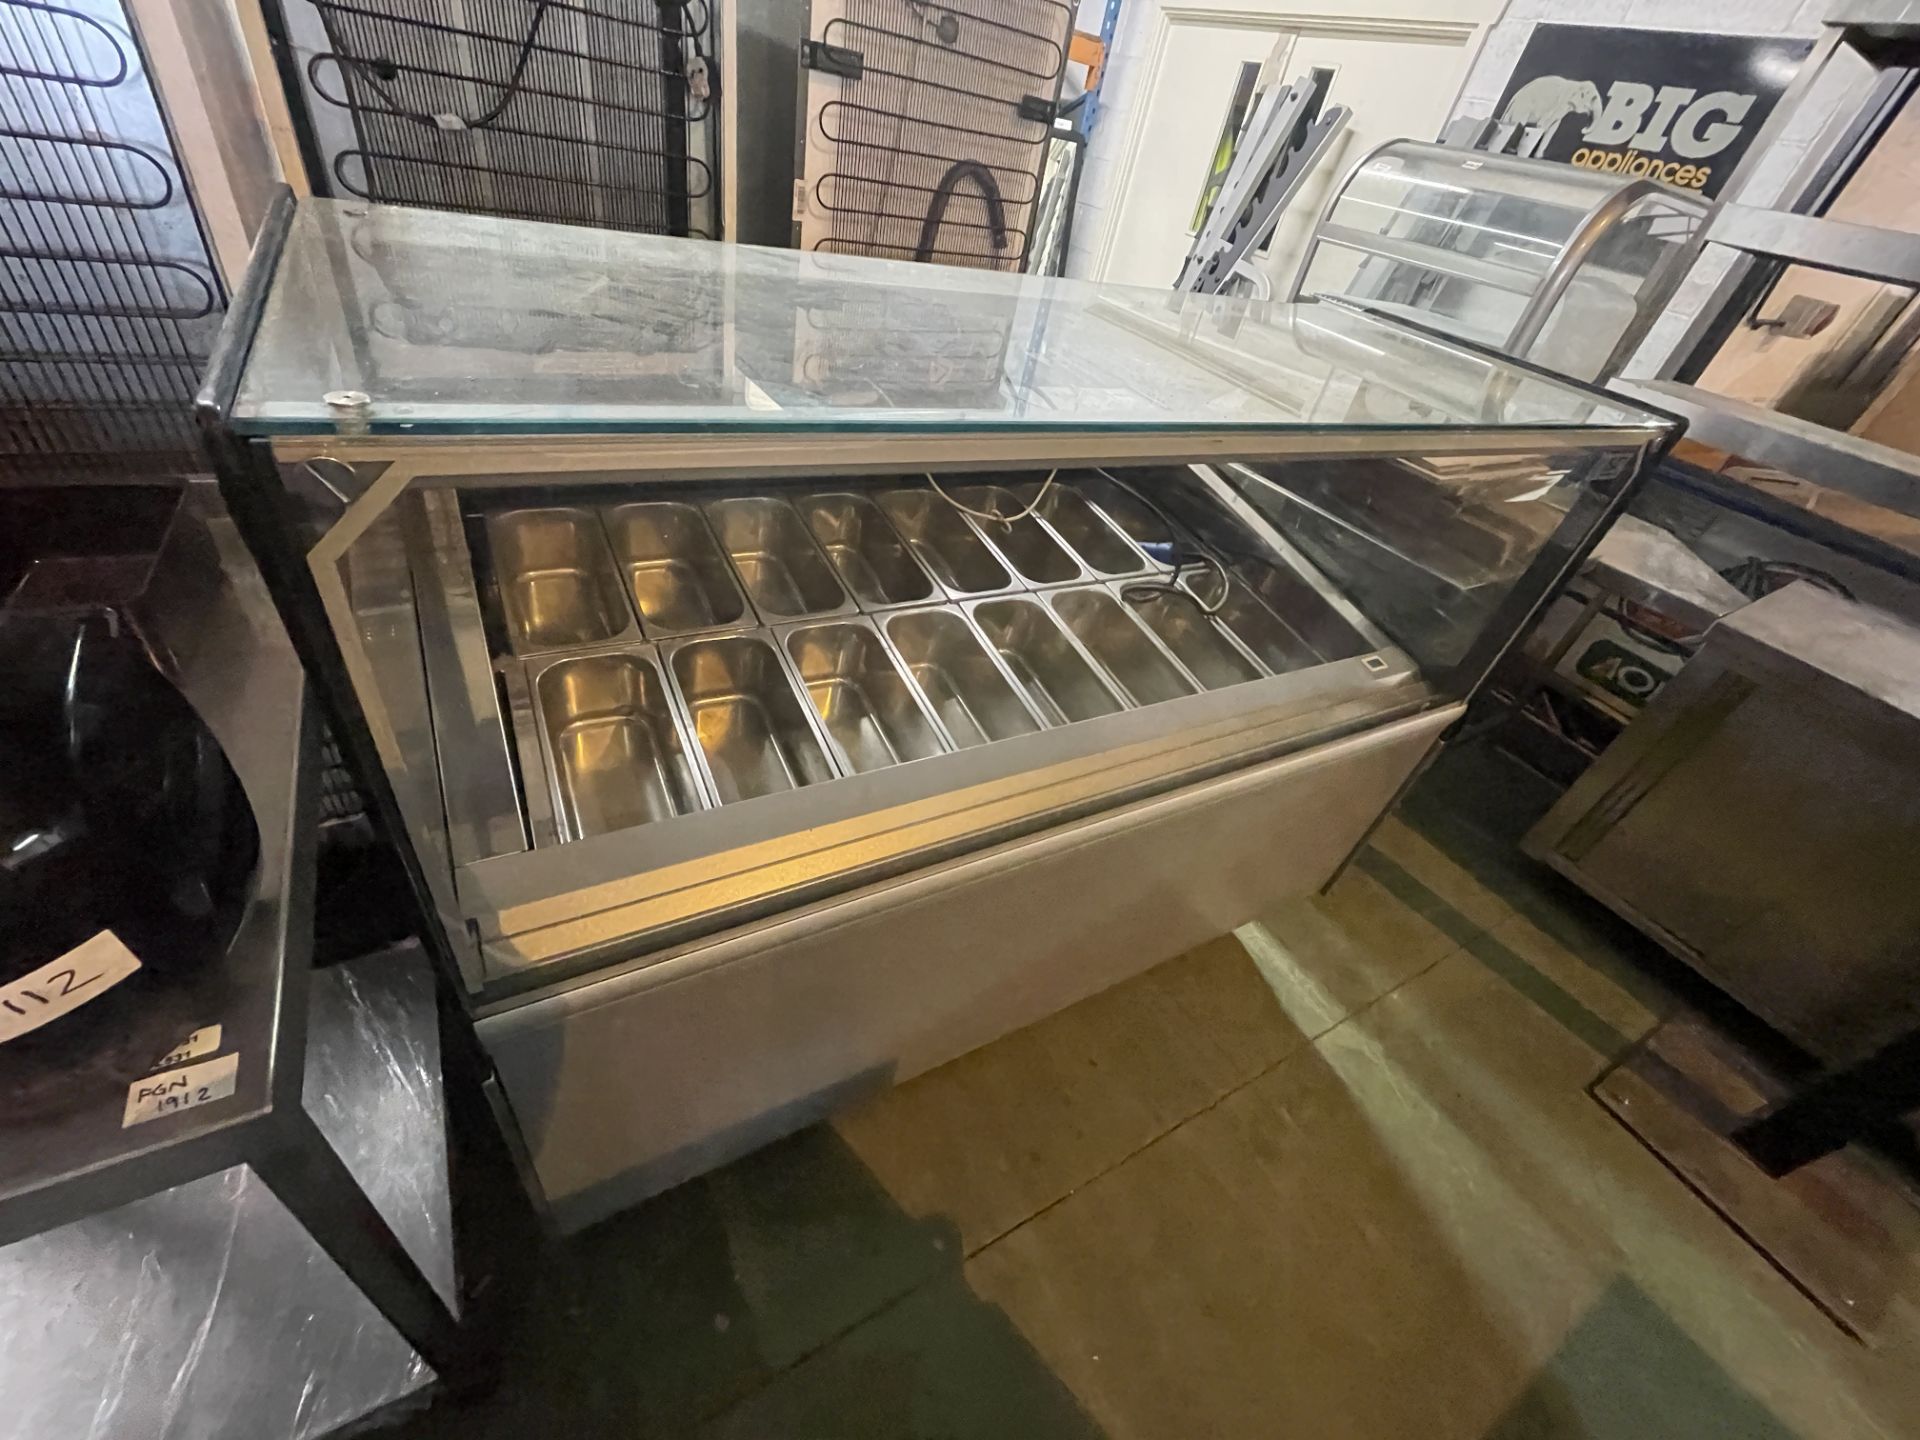 1 x Ice Cream & Gelato Display and Serve Cabinet by ISA - Dimensions: H131 x W150 x D105 cms - Image 8 of 8